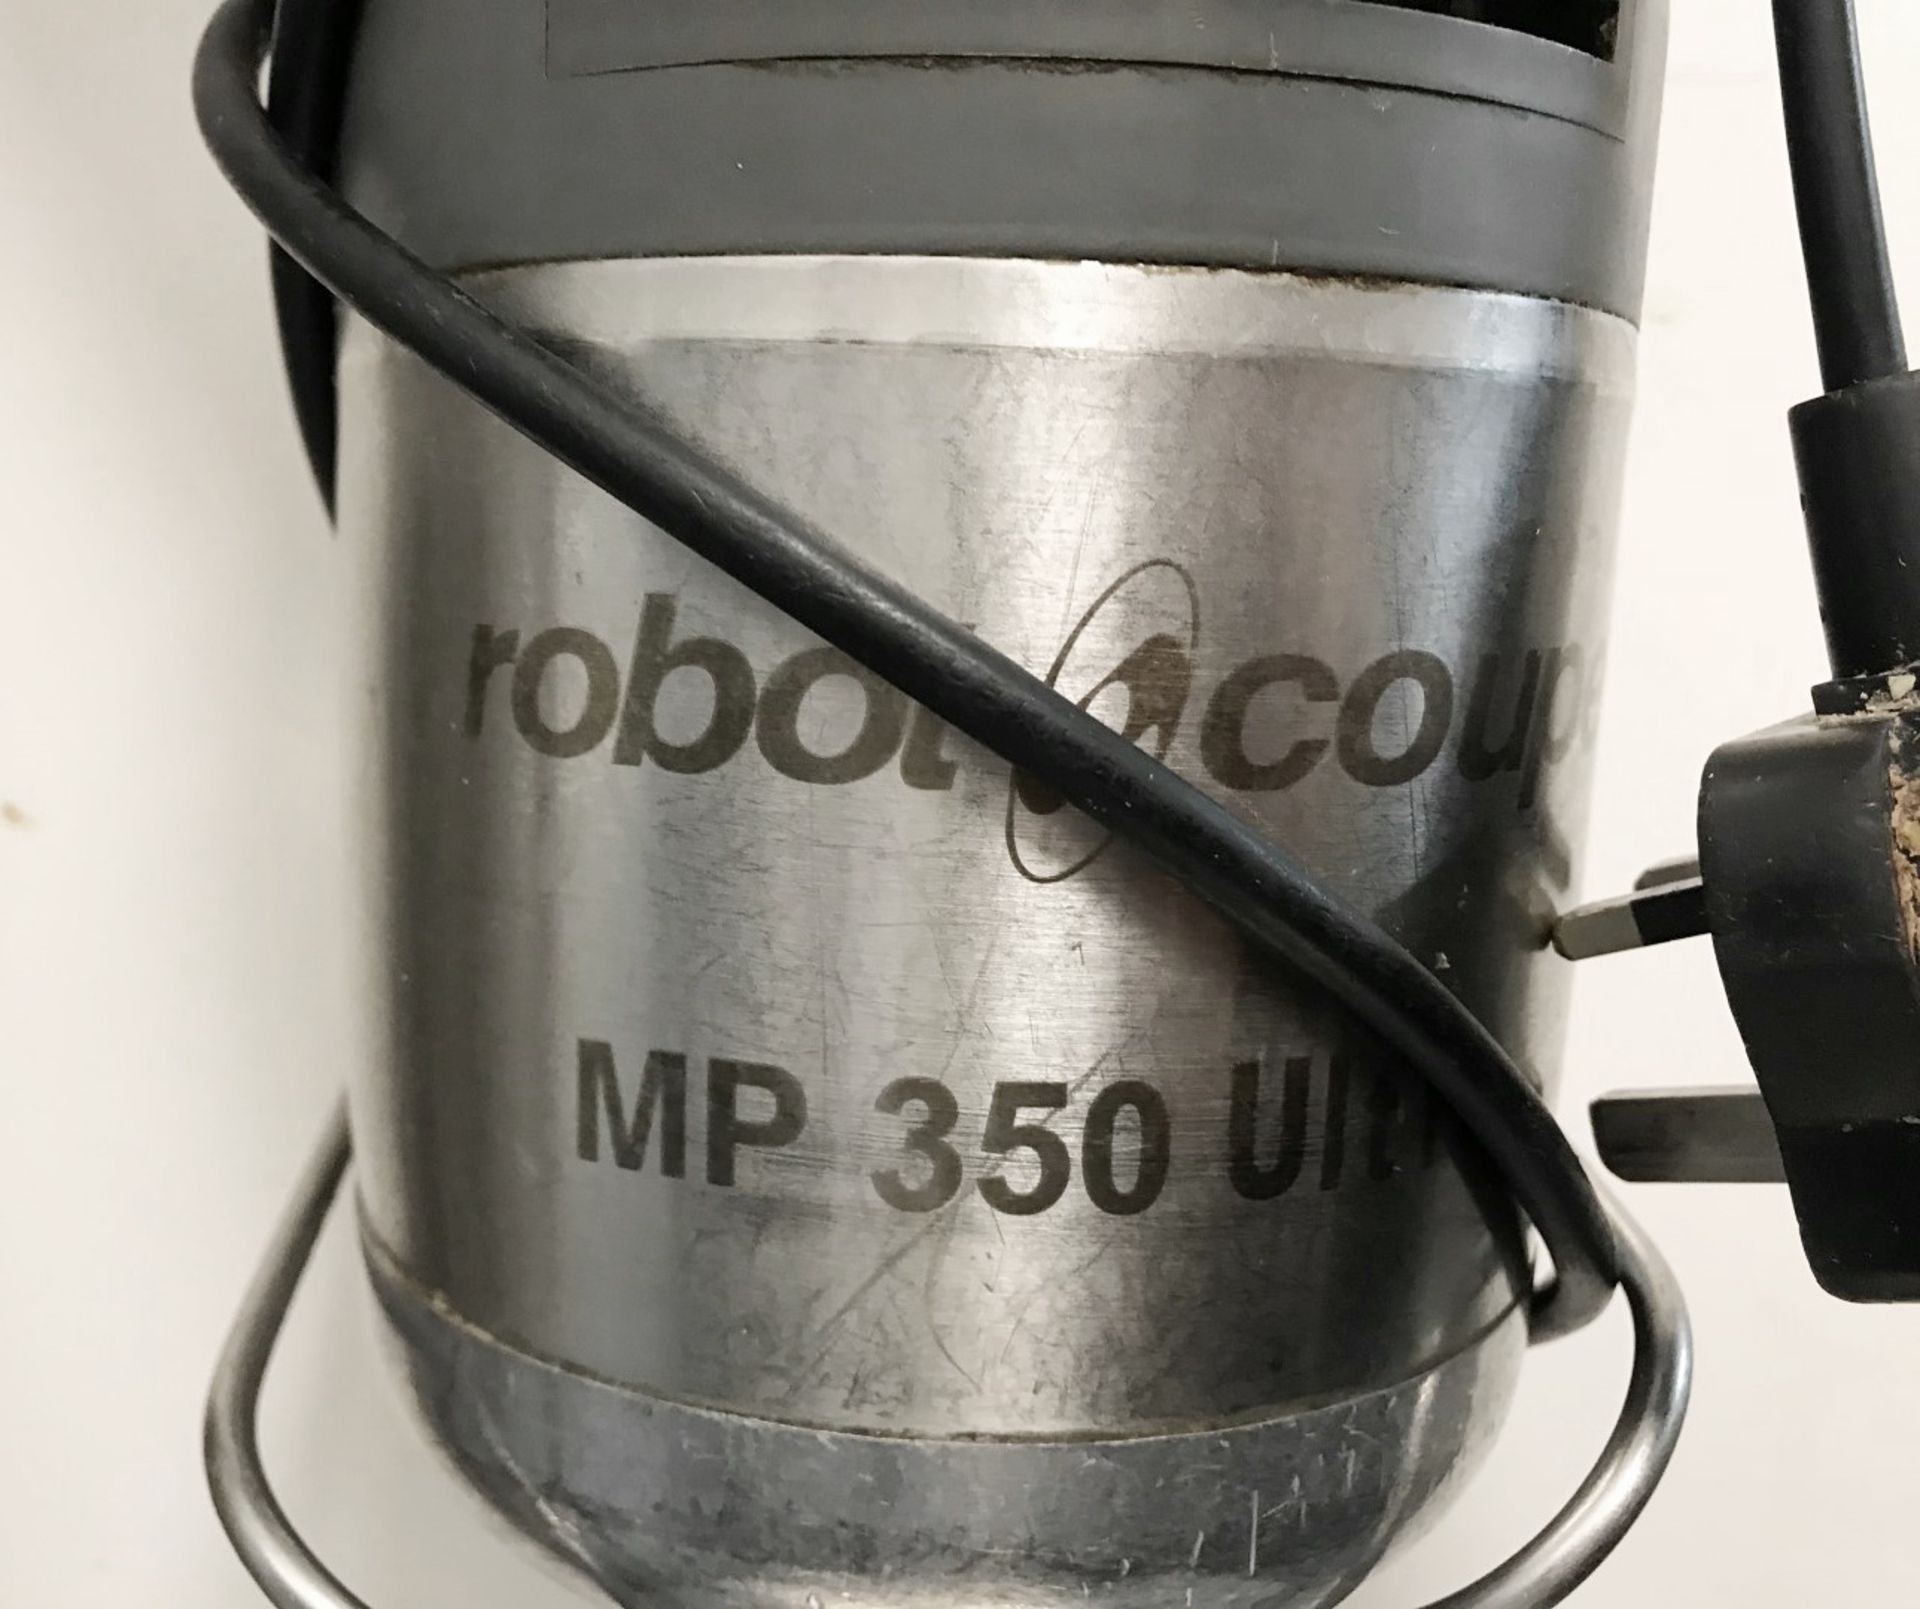 1 x Robot Coupe MP350 Food Mixer - CL554 - Ref IM - Location: Altrincham WA14 - Image 2 of 3